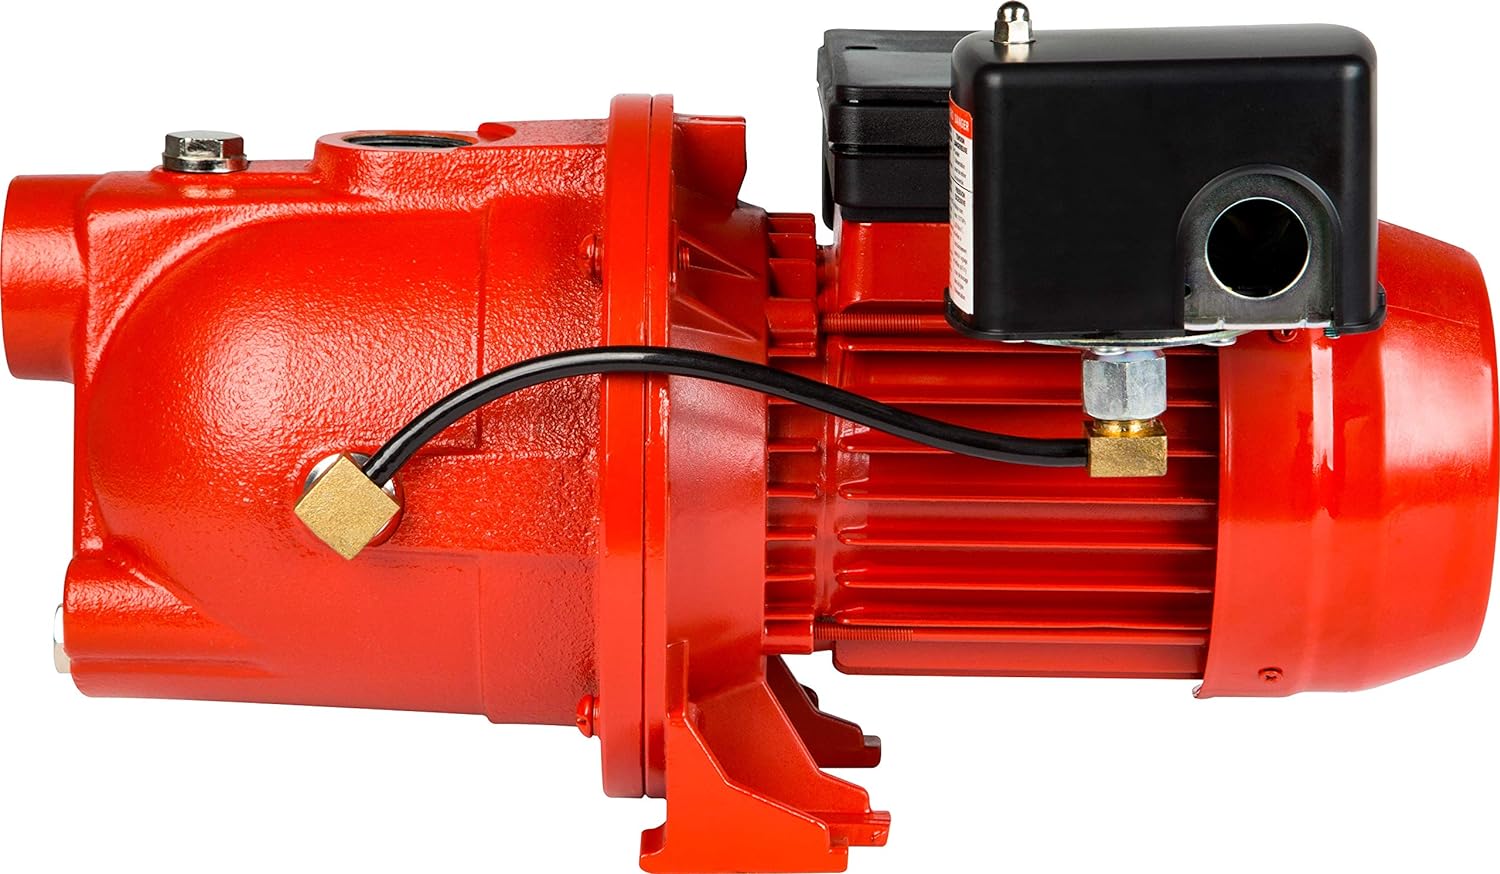 Red Lion RL-SWJ50 1/2 HP, 12.6 GPM Dual Voltage (115/230 Volts) Cast Iron Shallow Well Jet Pump, Red, 97080502